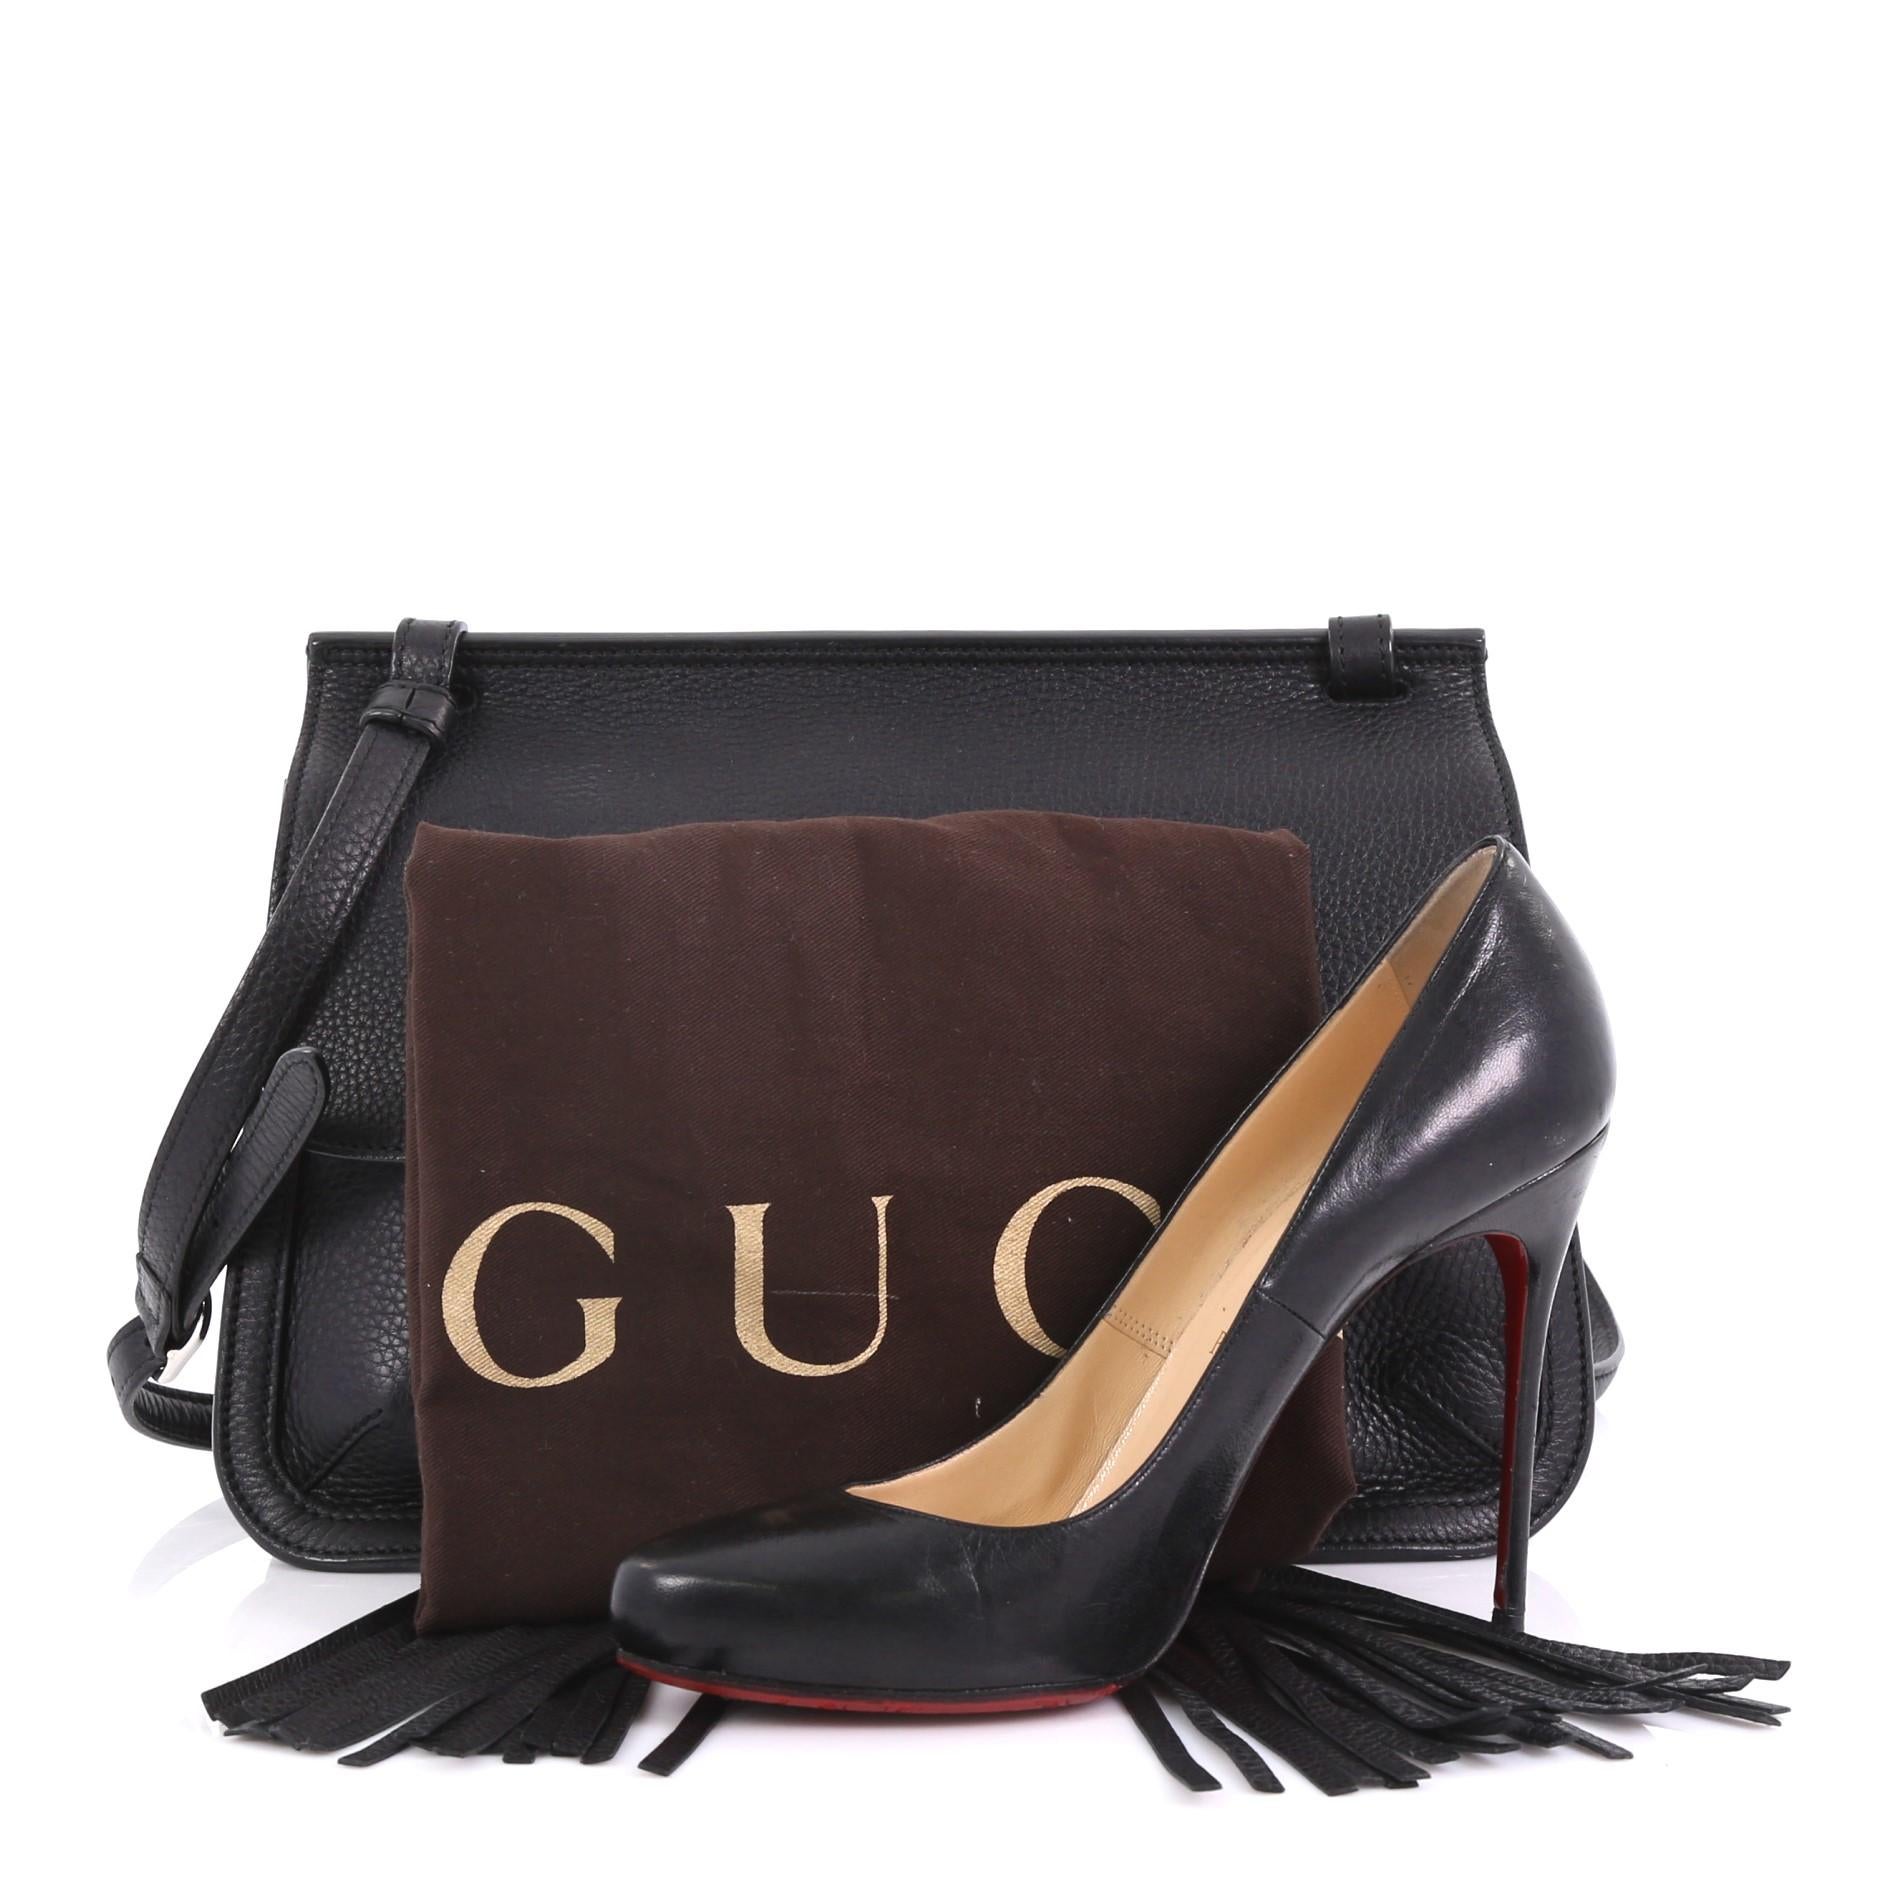 This Gucci Bamboo Daily Flap Bag Leather, crafted in black leather, features frontal flap with bamboo tassel fringe, adjustable leather strap, subtle Gucci logo, and silver-tone hardware. Its flap opens to a multicolor fabric interior with side zip